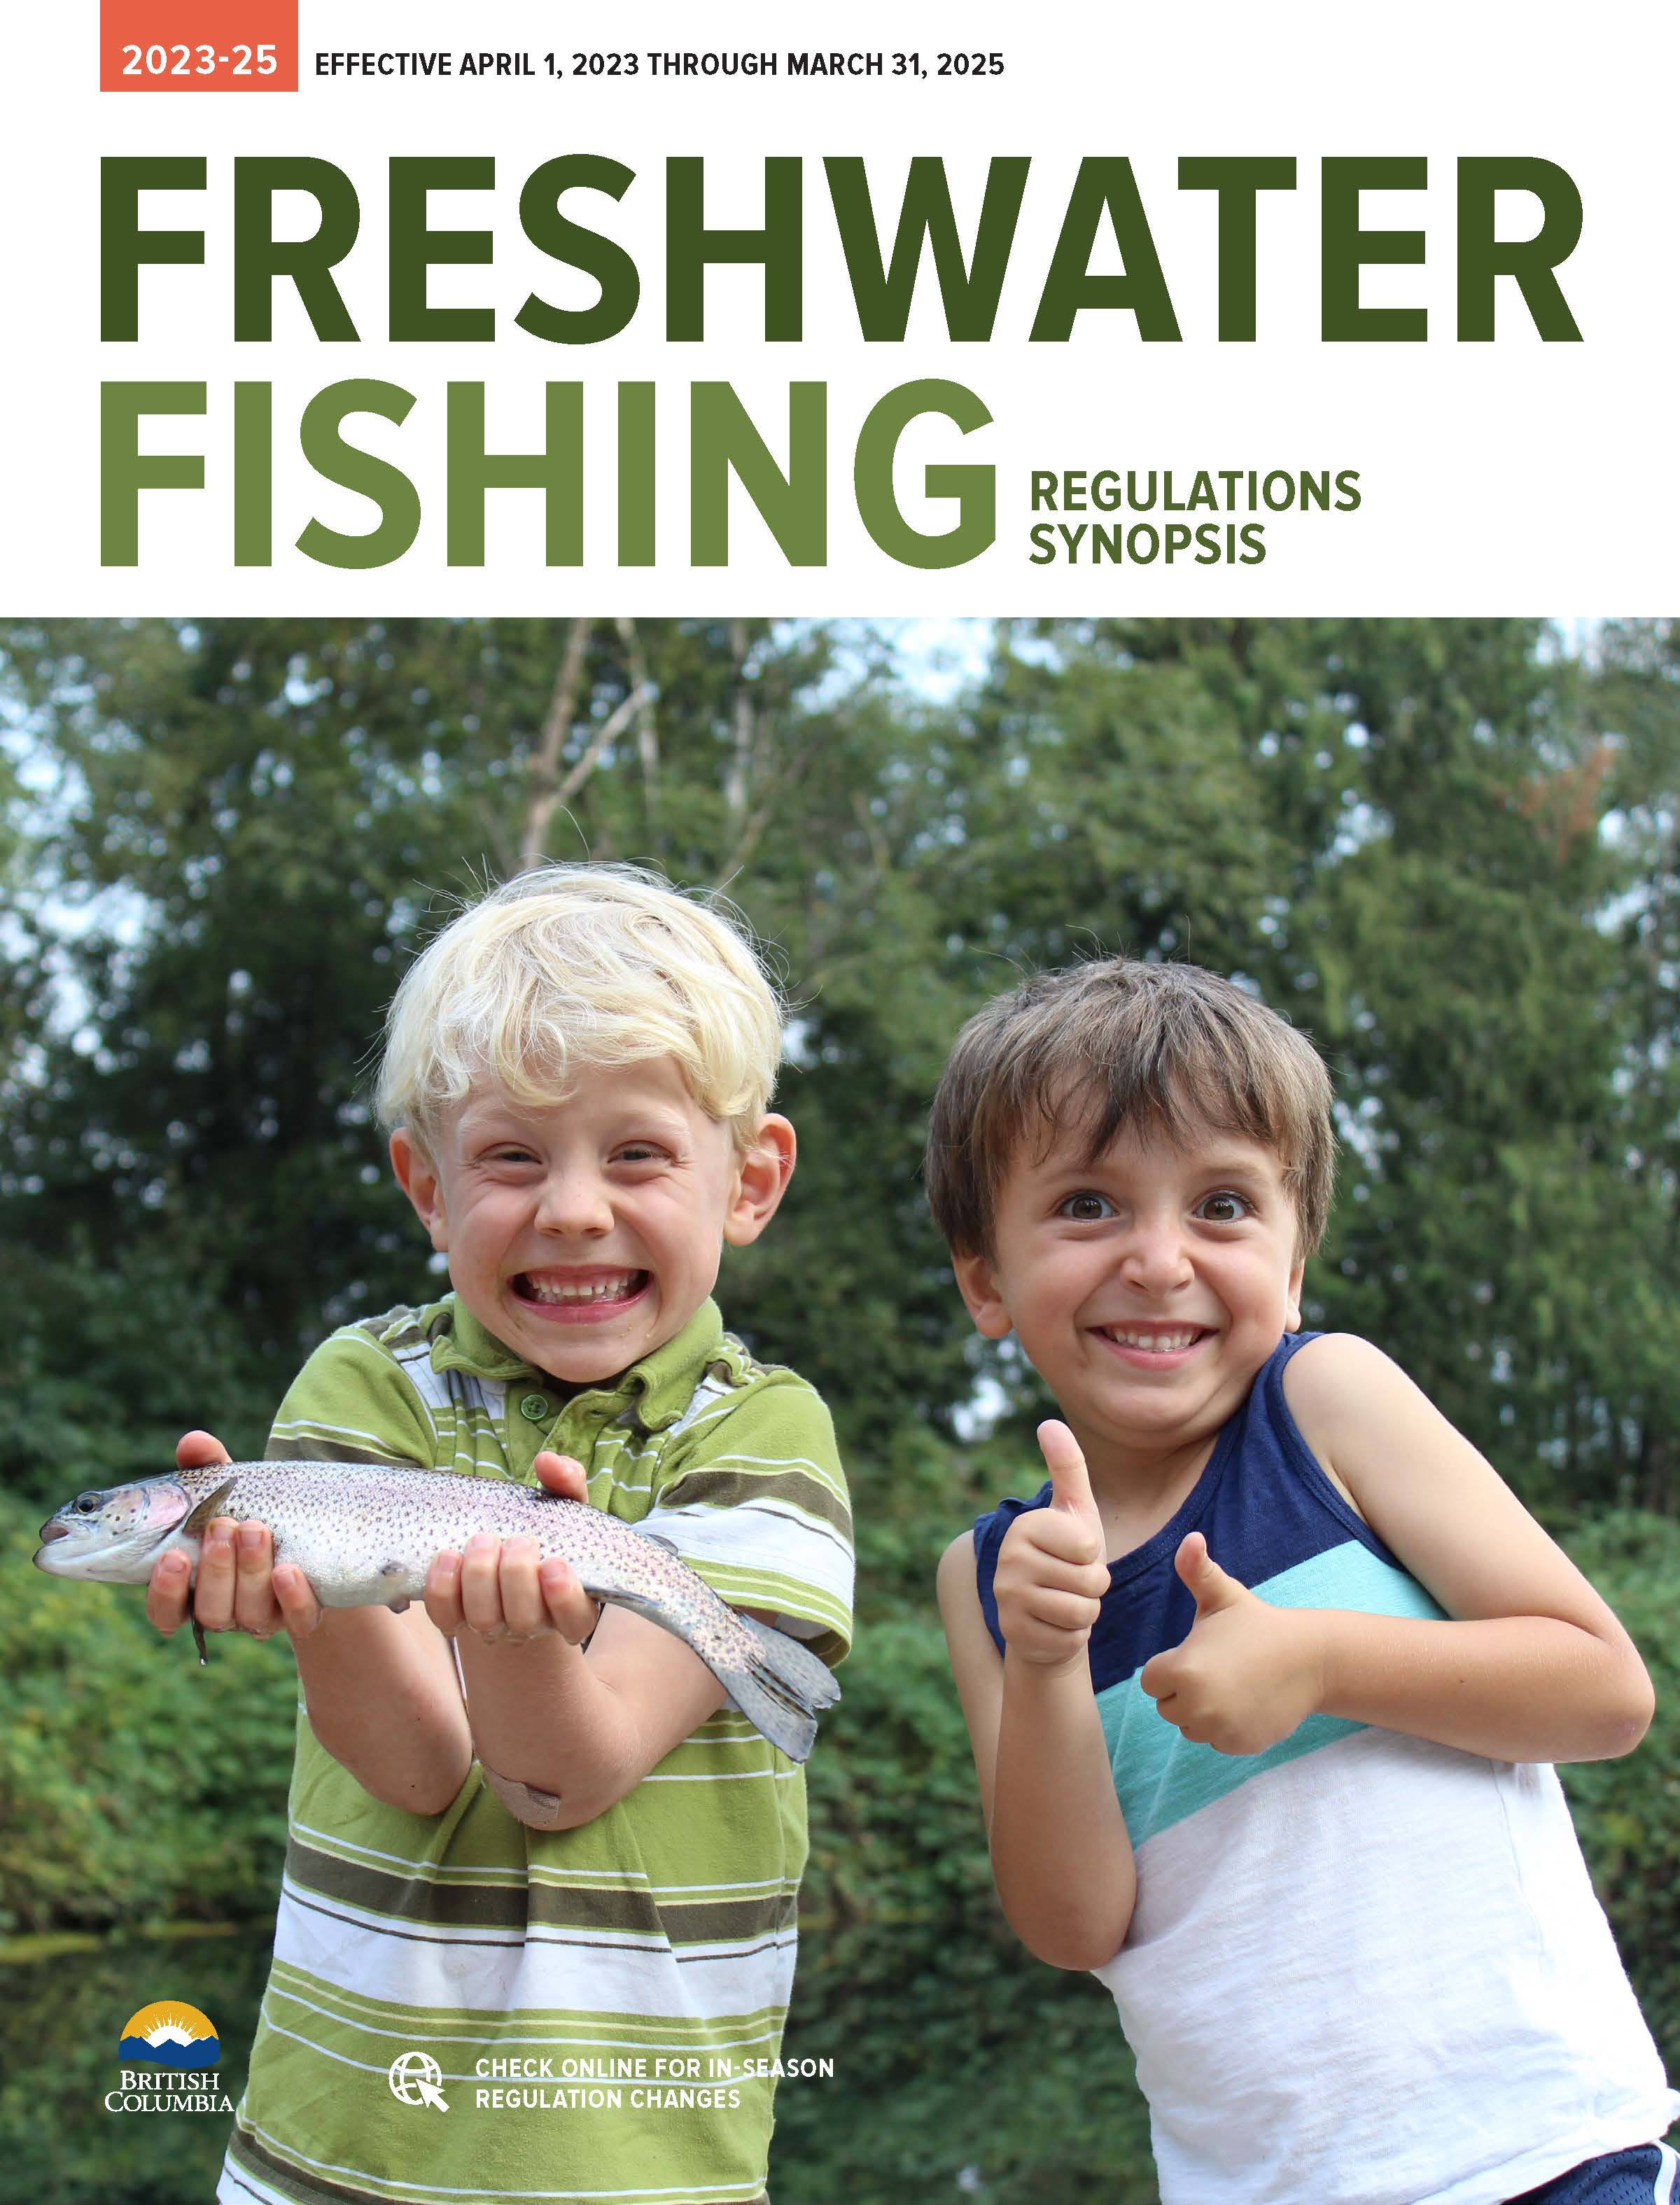 Image links to the current Freshwater Fishing Regulation Synopsis